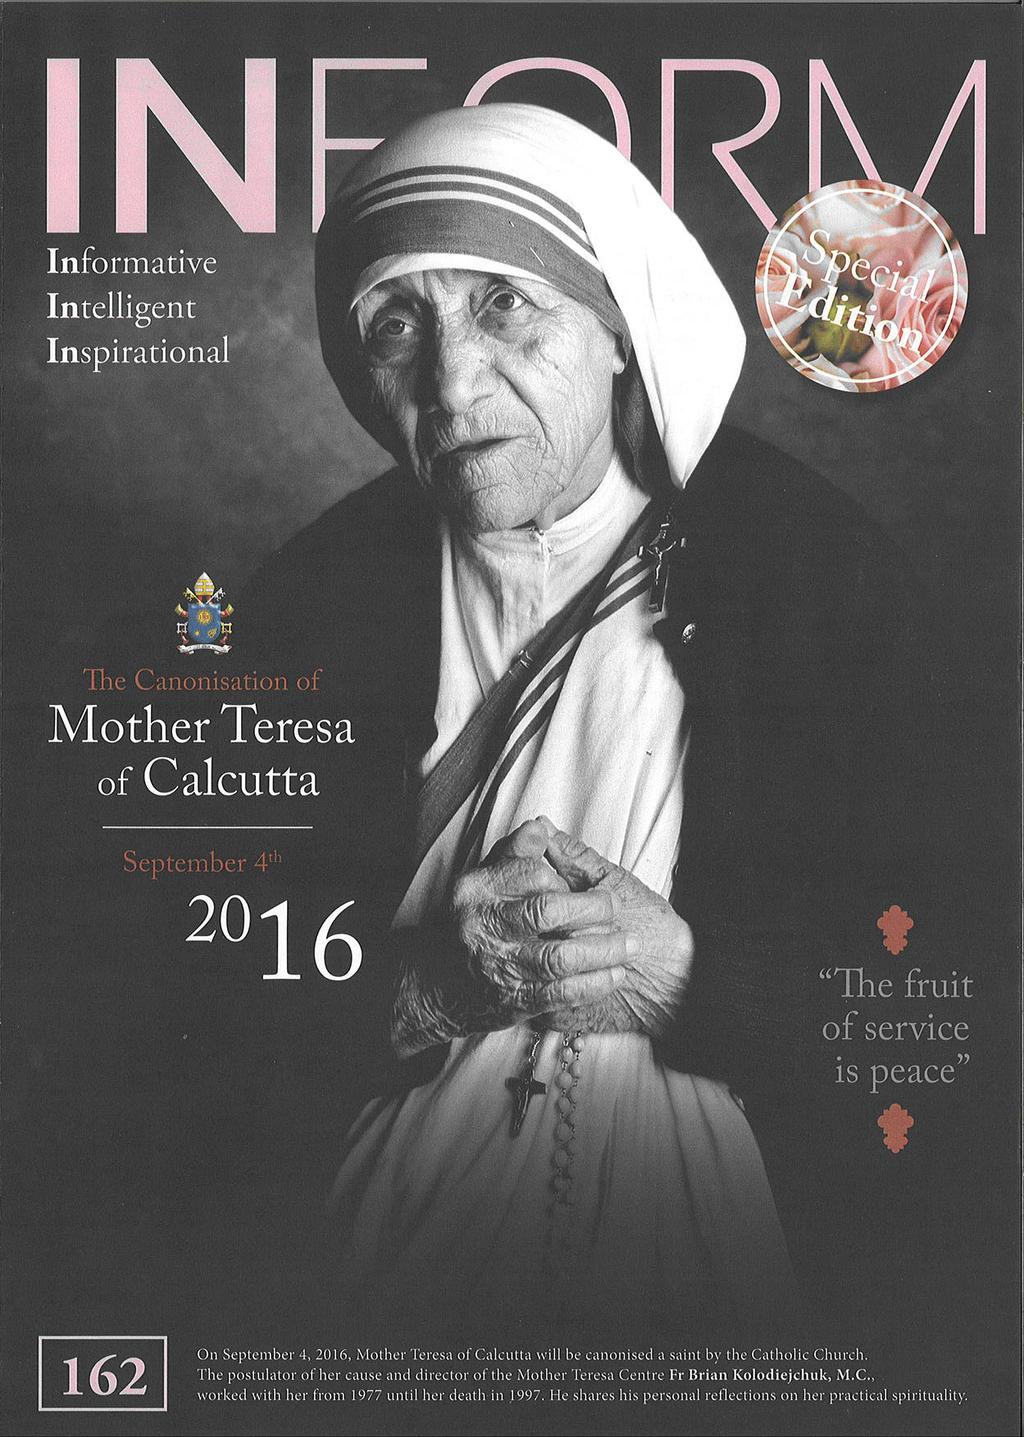 Informative Intelligent Inspirational The Canonisfthon of Mother Teresa of Calcutta September 4th 20 1 "The fruit of service is peace" On September 4, 2016, Mother Teresa of Calcutta will be